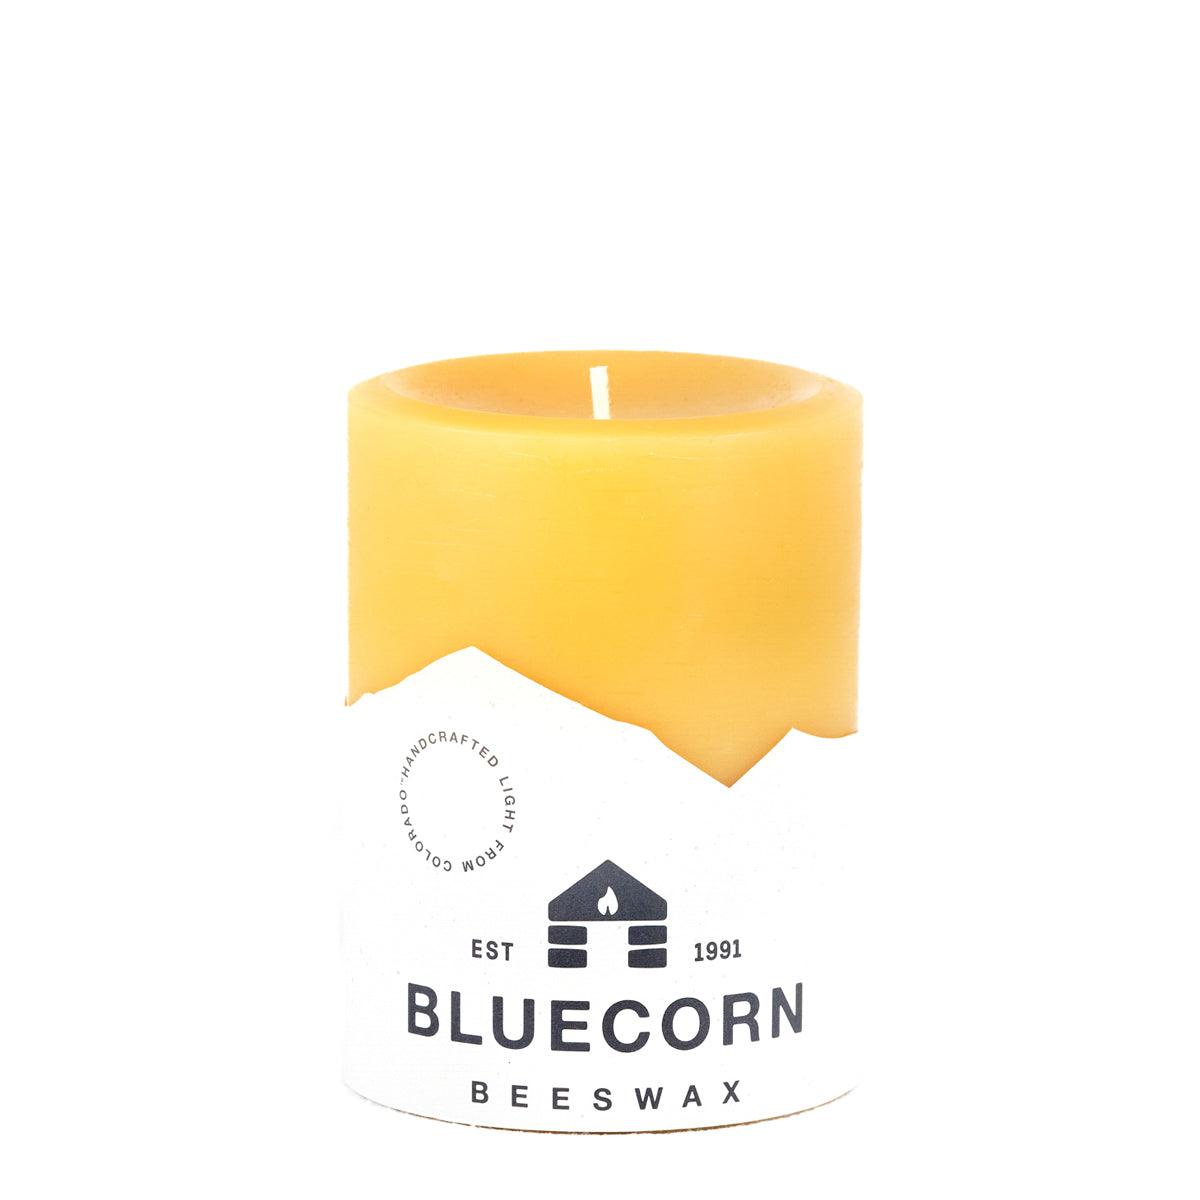 Bluecorn Beeswax 100% Pure Beeswax 3" x 4" Raw Pillar Candle. Burn Time: 60 hours. Made with 100% Pure Beeswax, wax is golden in color with a light honey scent. Made with 100% pure cotton wick, no lead and paraffin free. Clean burning and non-toxic. Features Bluecorn Beeswax label printed on 100% recycled paper. Clearance items might have an odd blemish or air bubble, but will still burn beautifully.